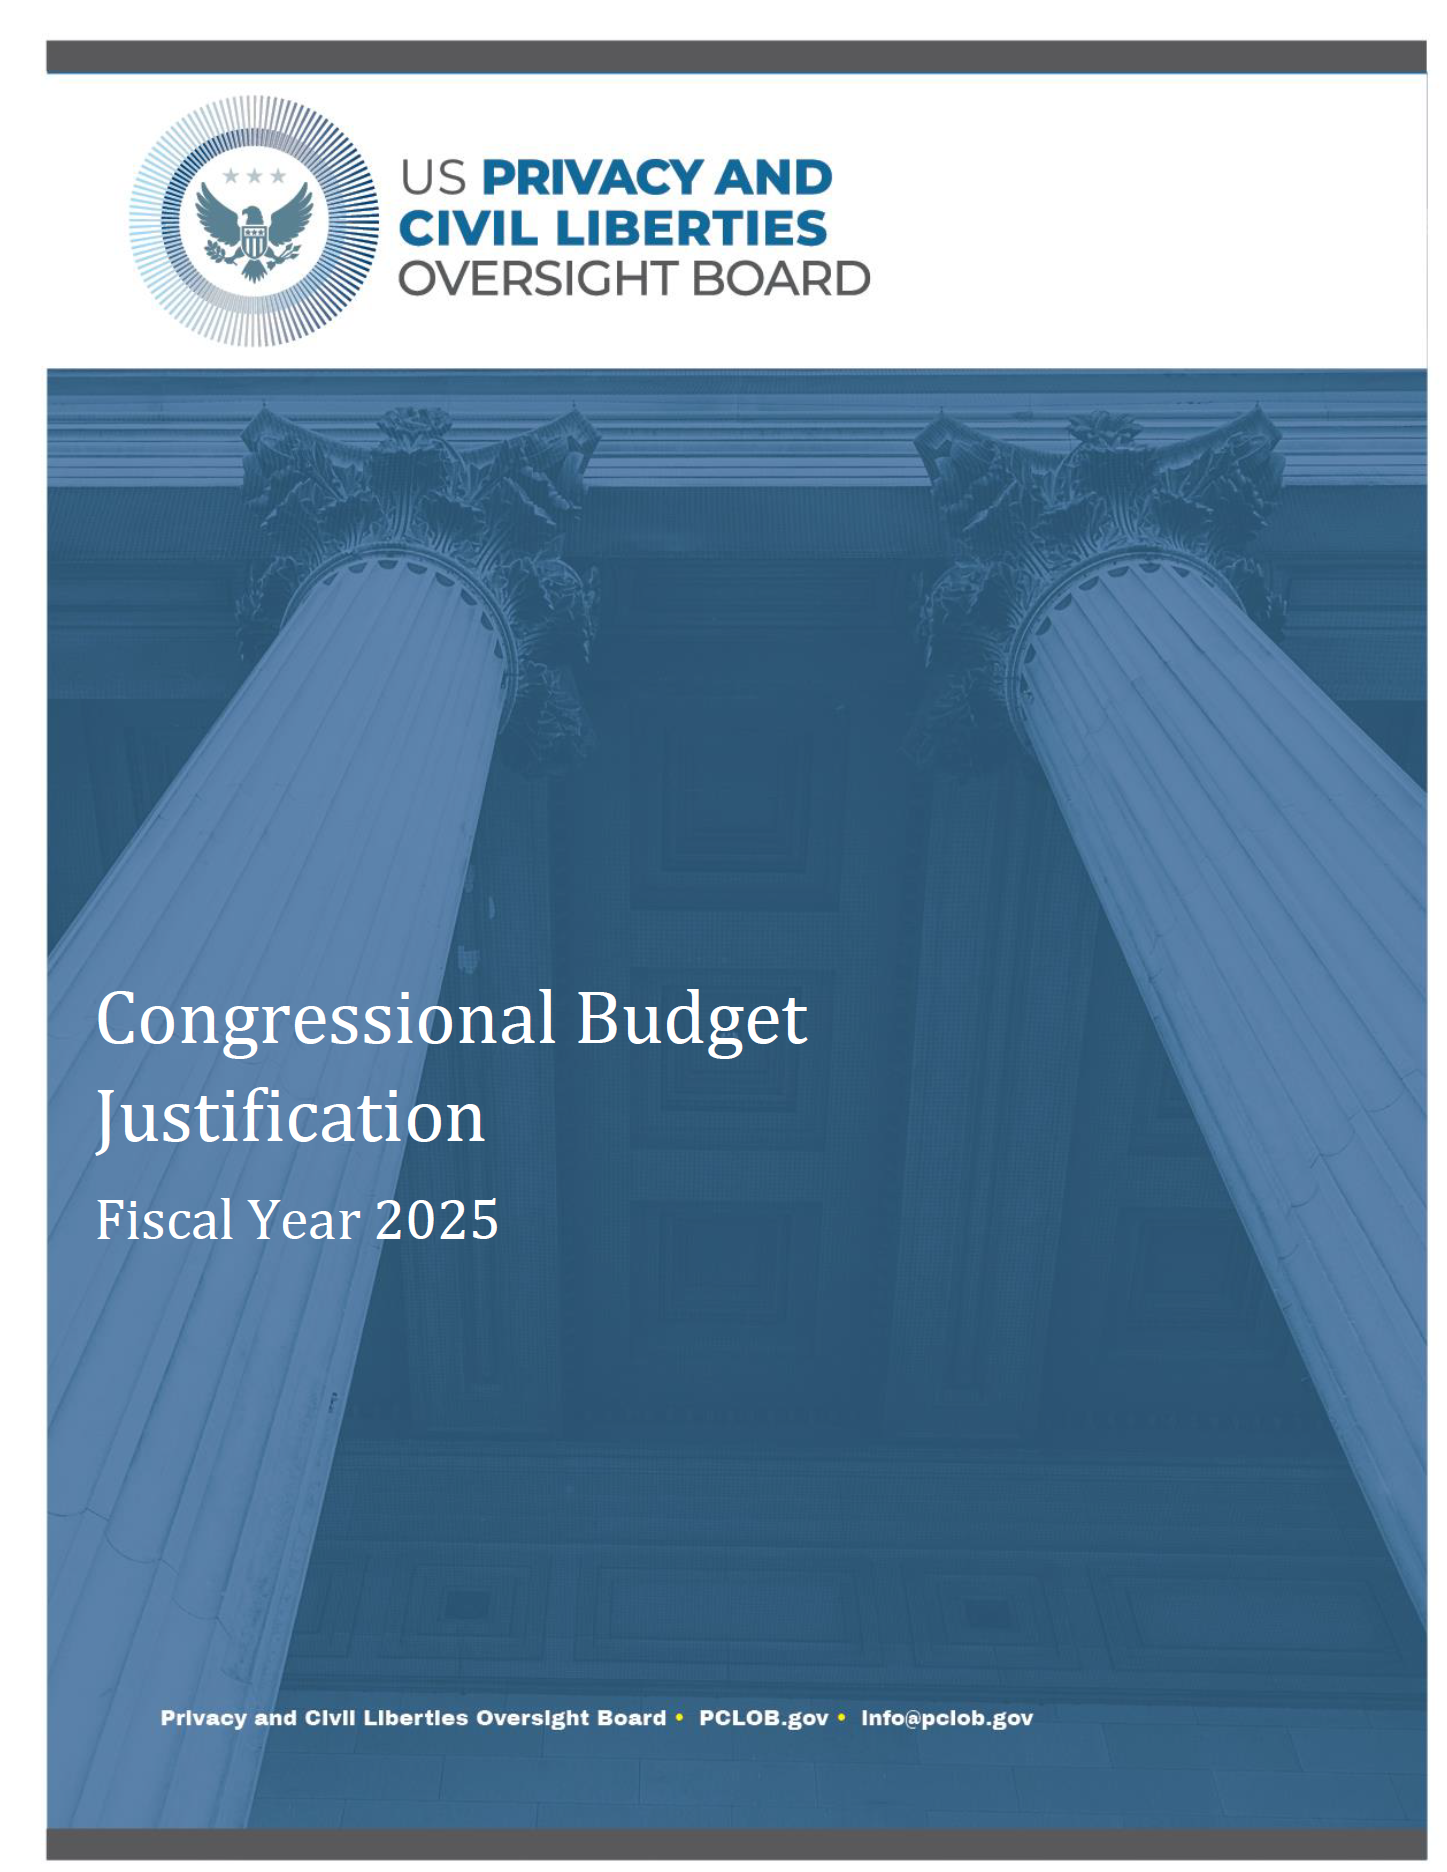 download PCLOB FY 2025 Congressional Budget Justification